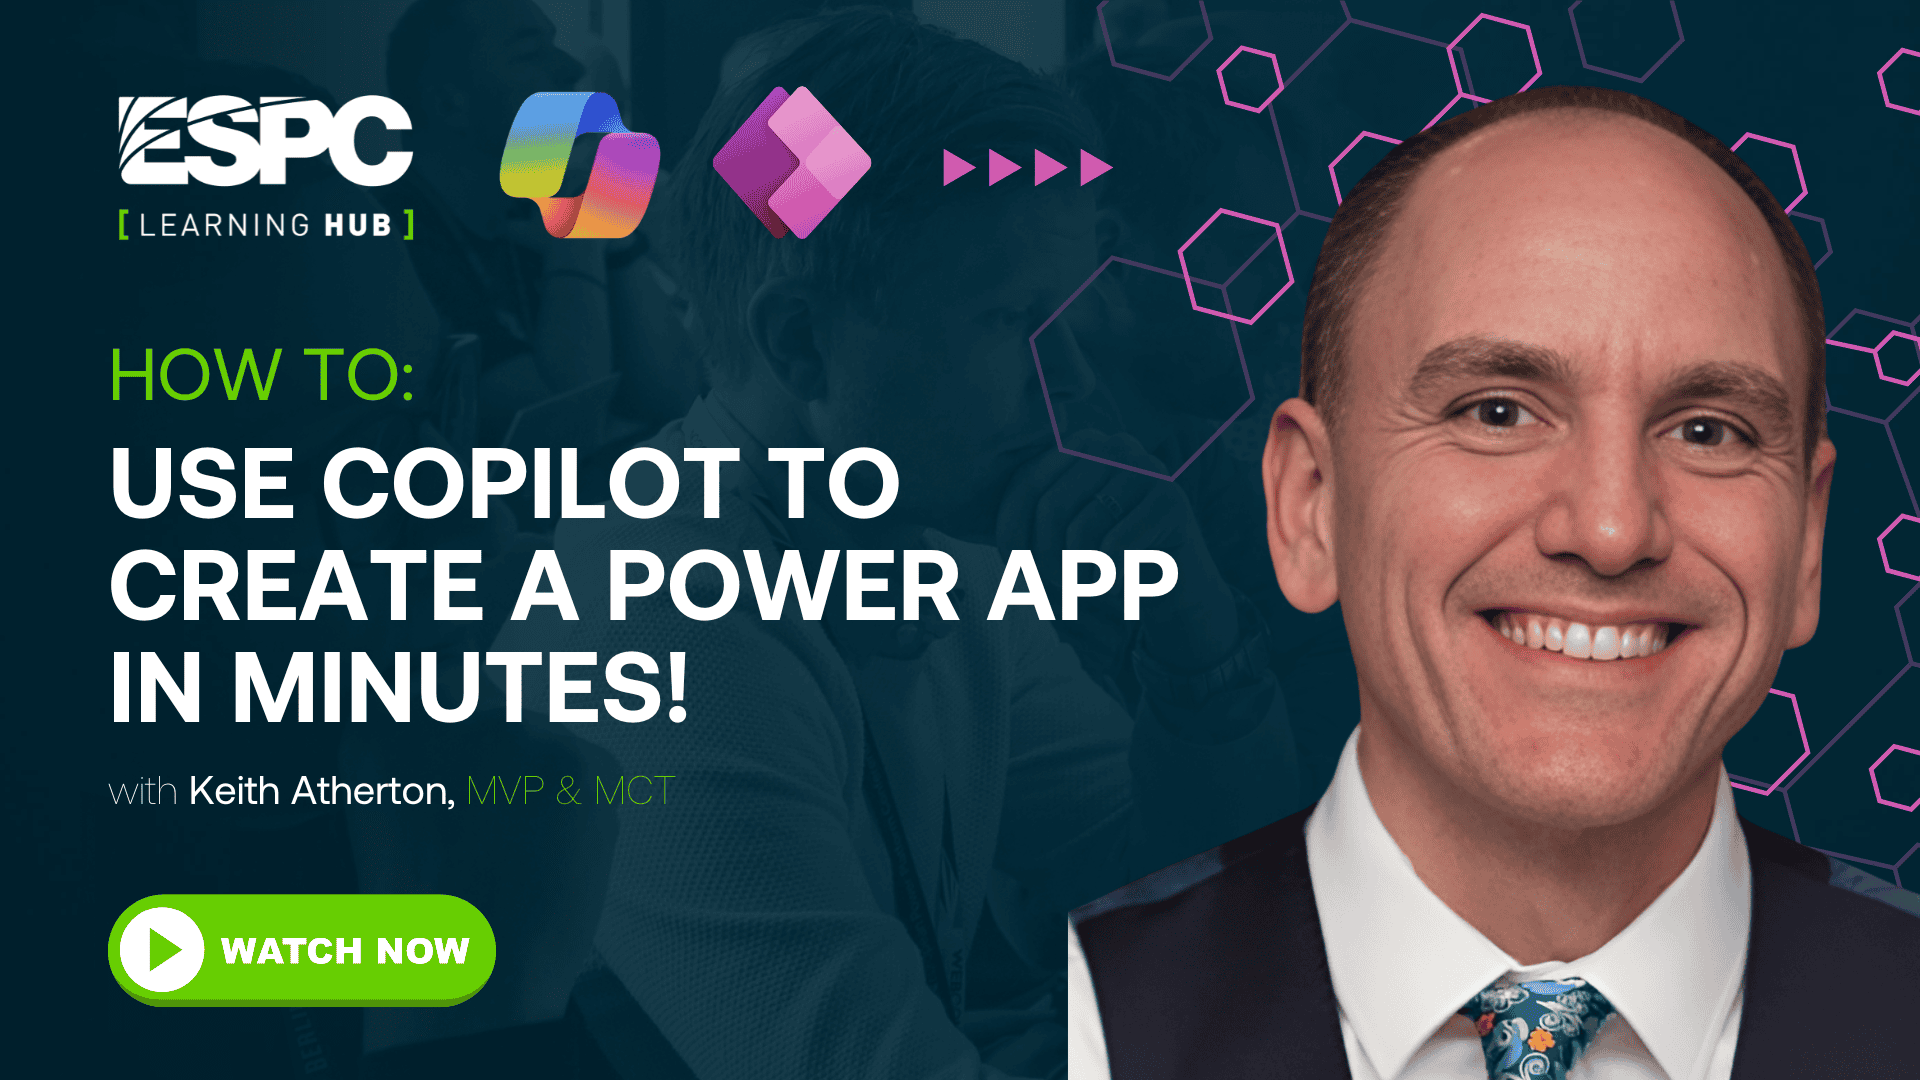 How To Use Copilot to Create a Power App in Minutes!